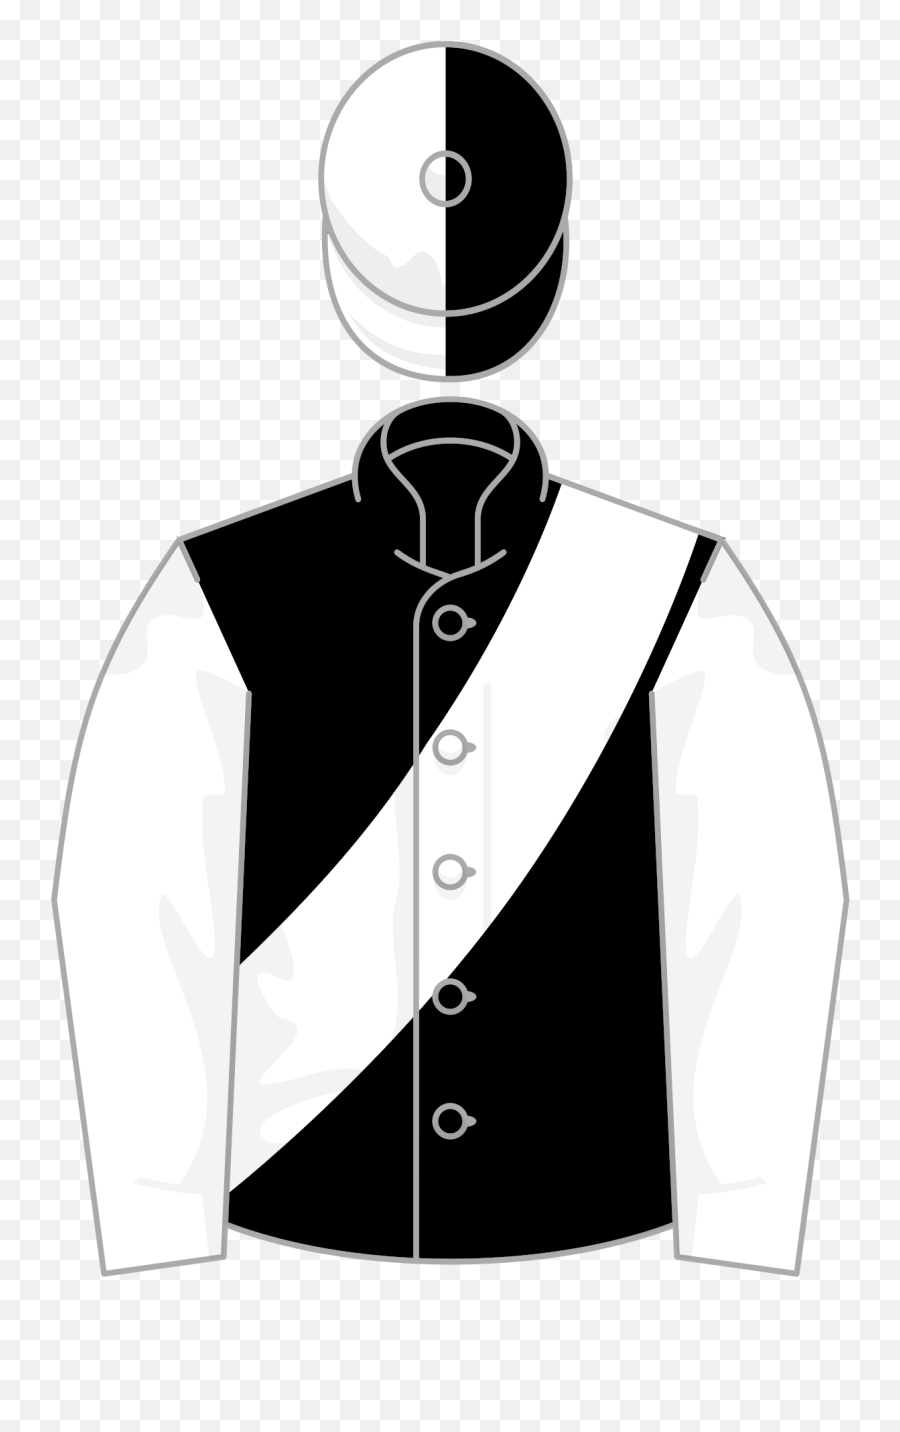 Fileowner Mr P A Philipps Halved Capsvg - Wikipedia Horse Racing Png,Shirt Flat Icon